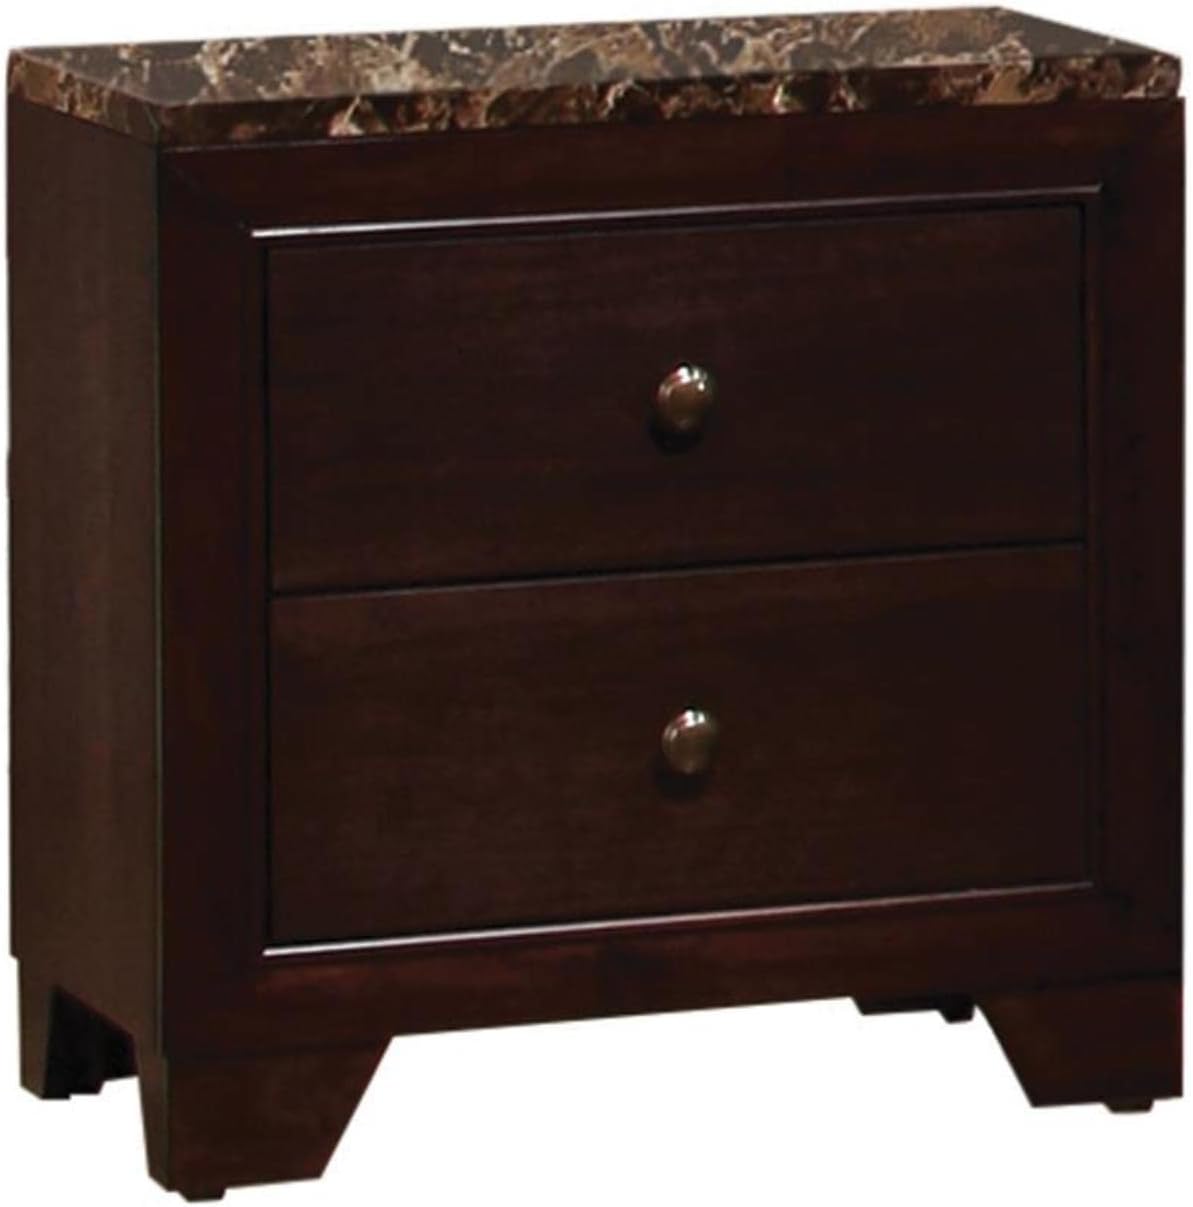 2 Drawer Nightstand with Faux Marble Top in Cappuccino Finish